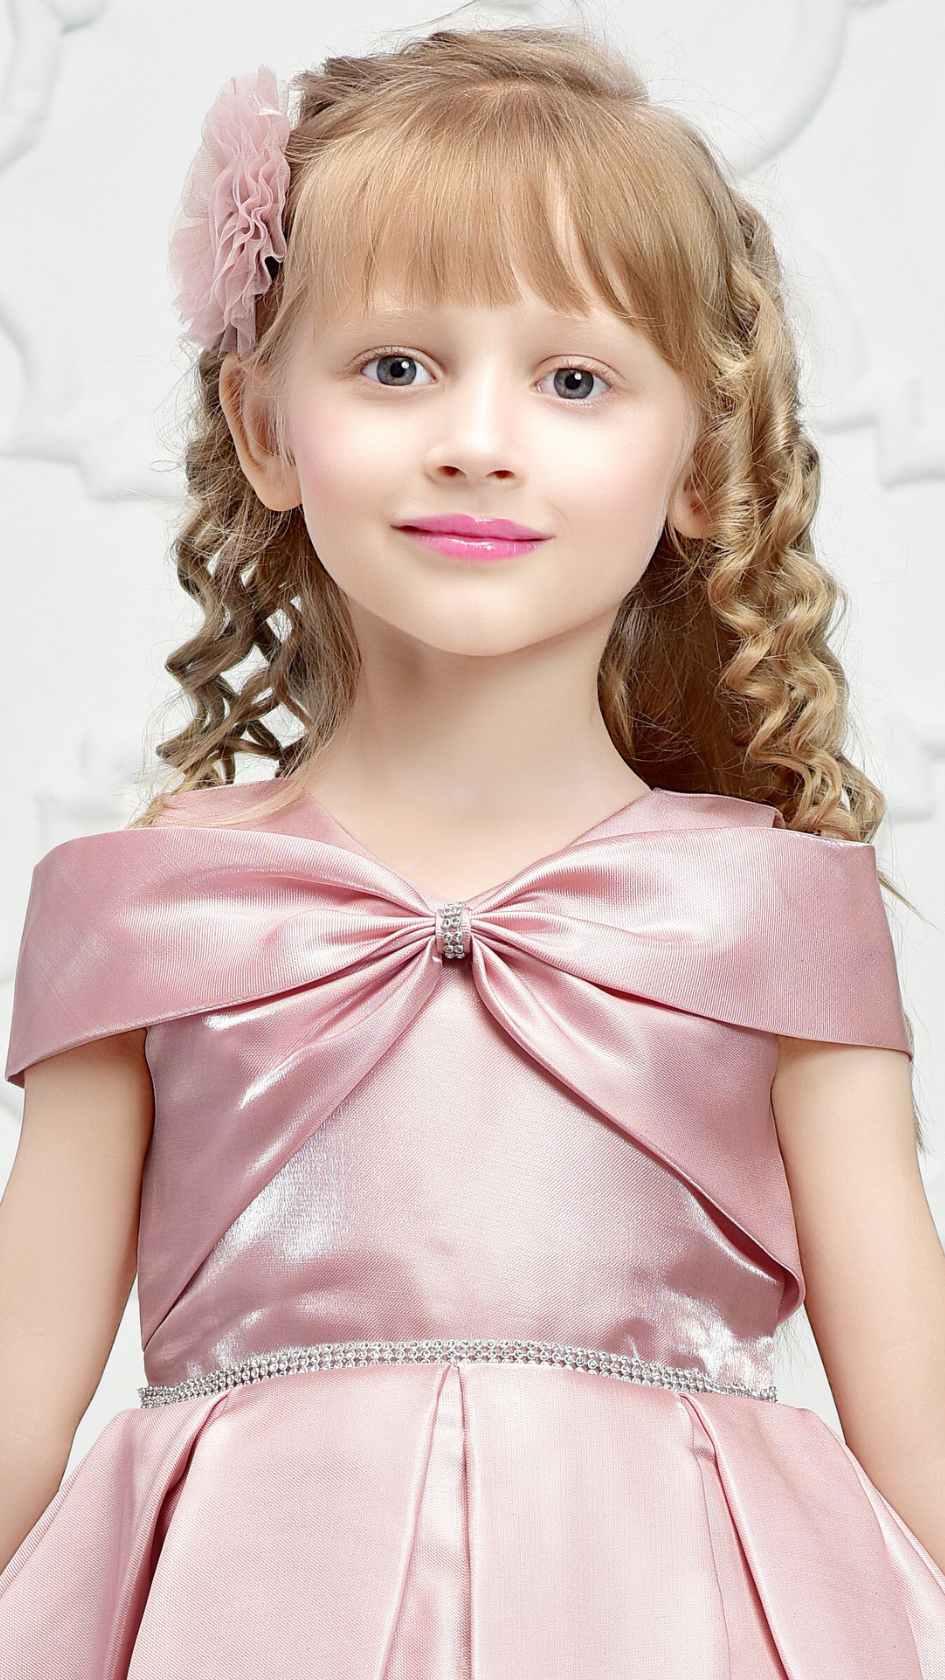 Elegant Peach Satin Frock With Bow Style Neckline For Girls - Lagorii Kids